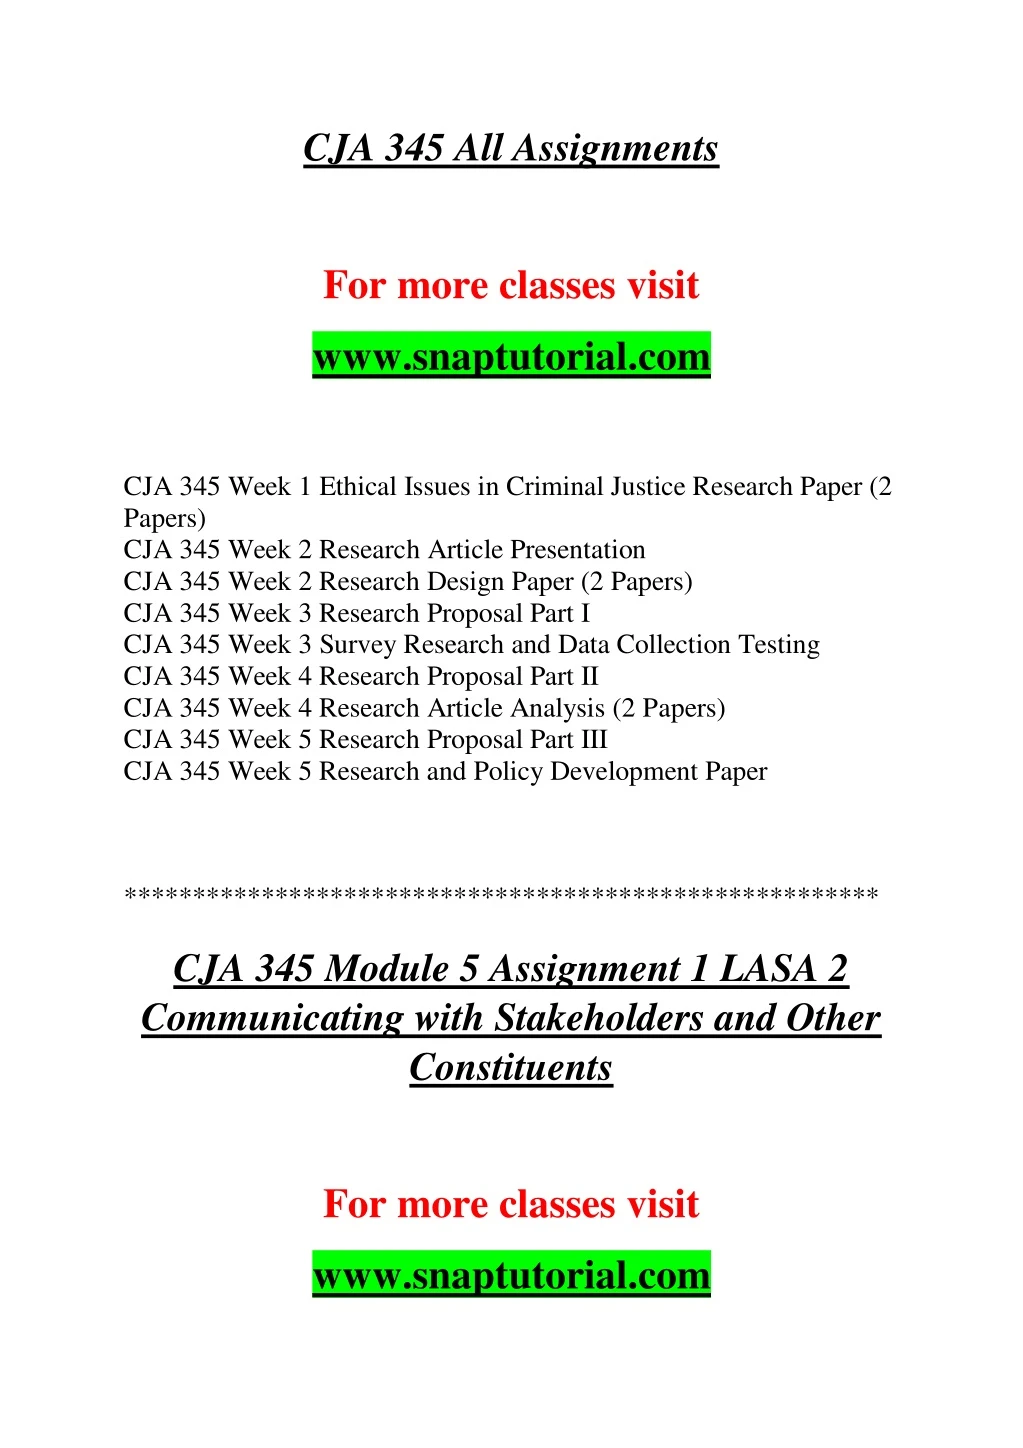 cja 345 all assignments